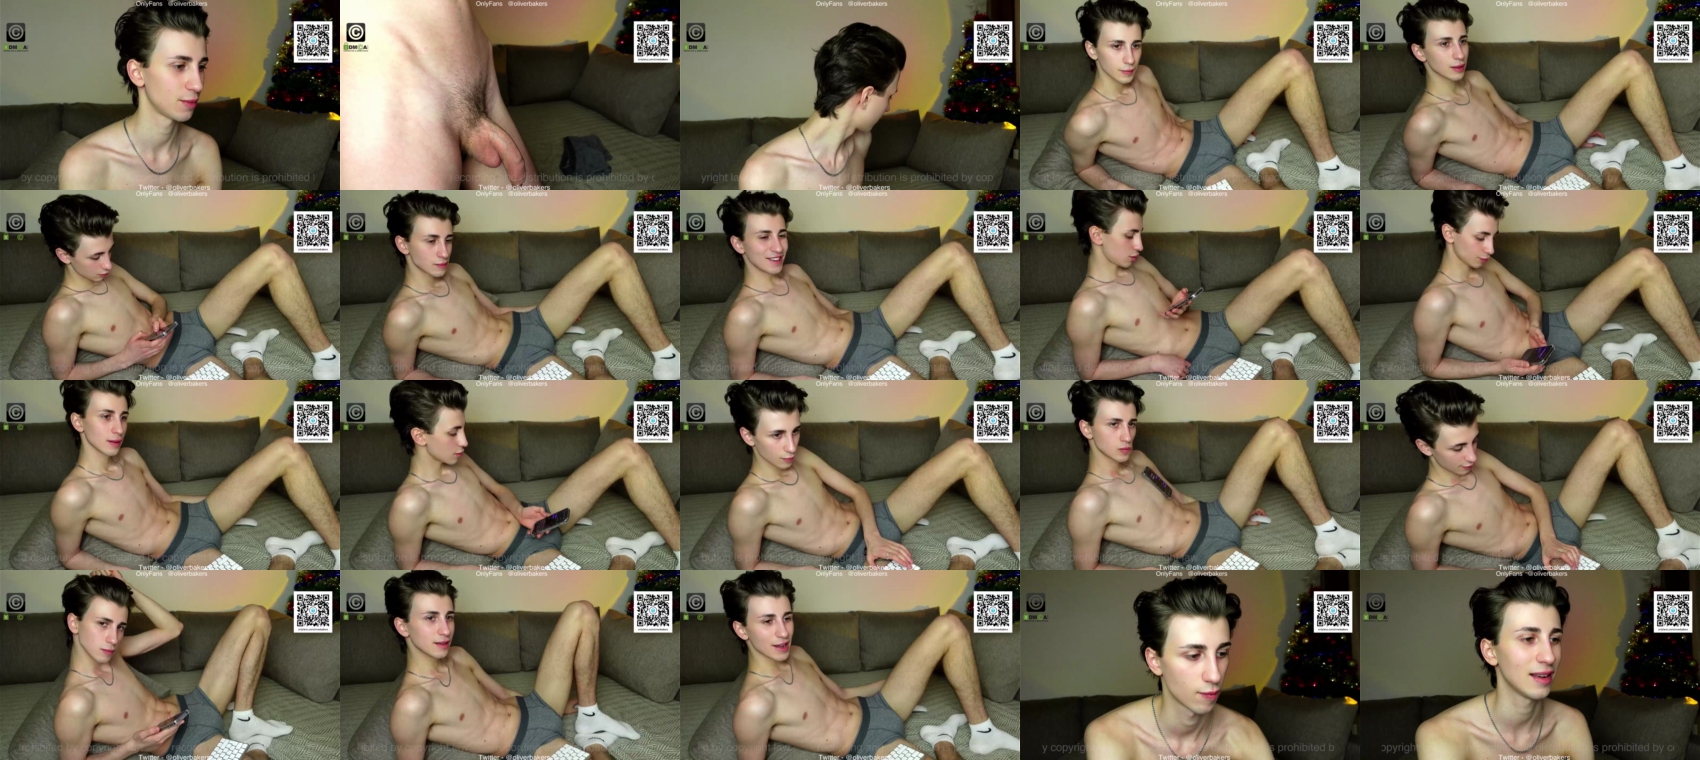 oliver_baker sexymale CAM SHOW @ Chaturbate 23-01-2022